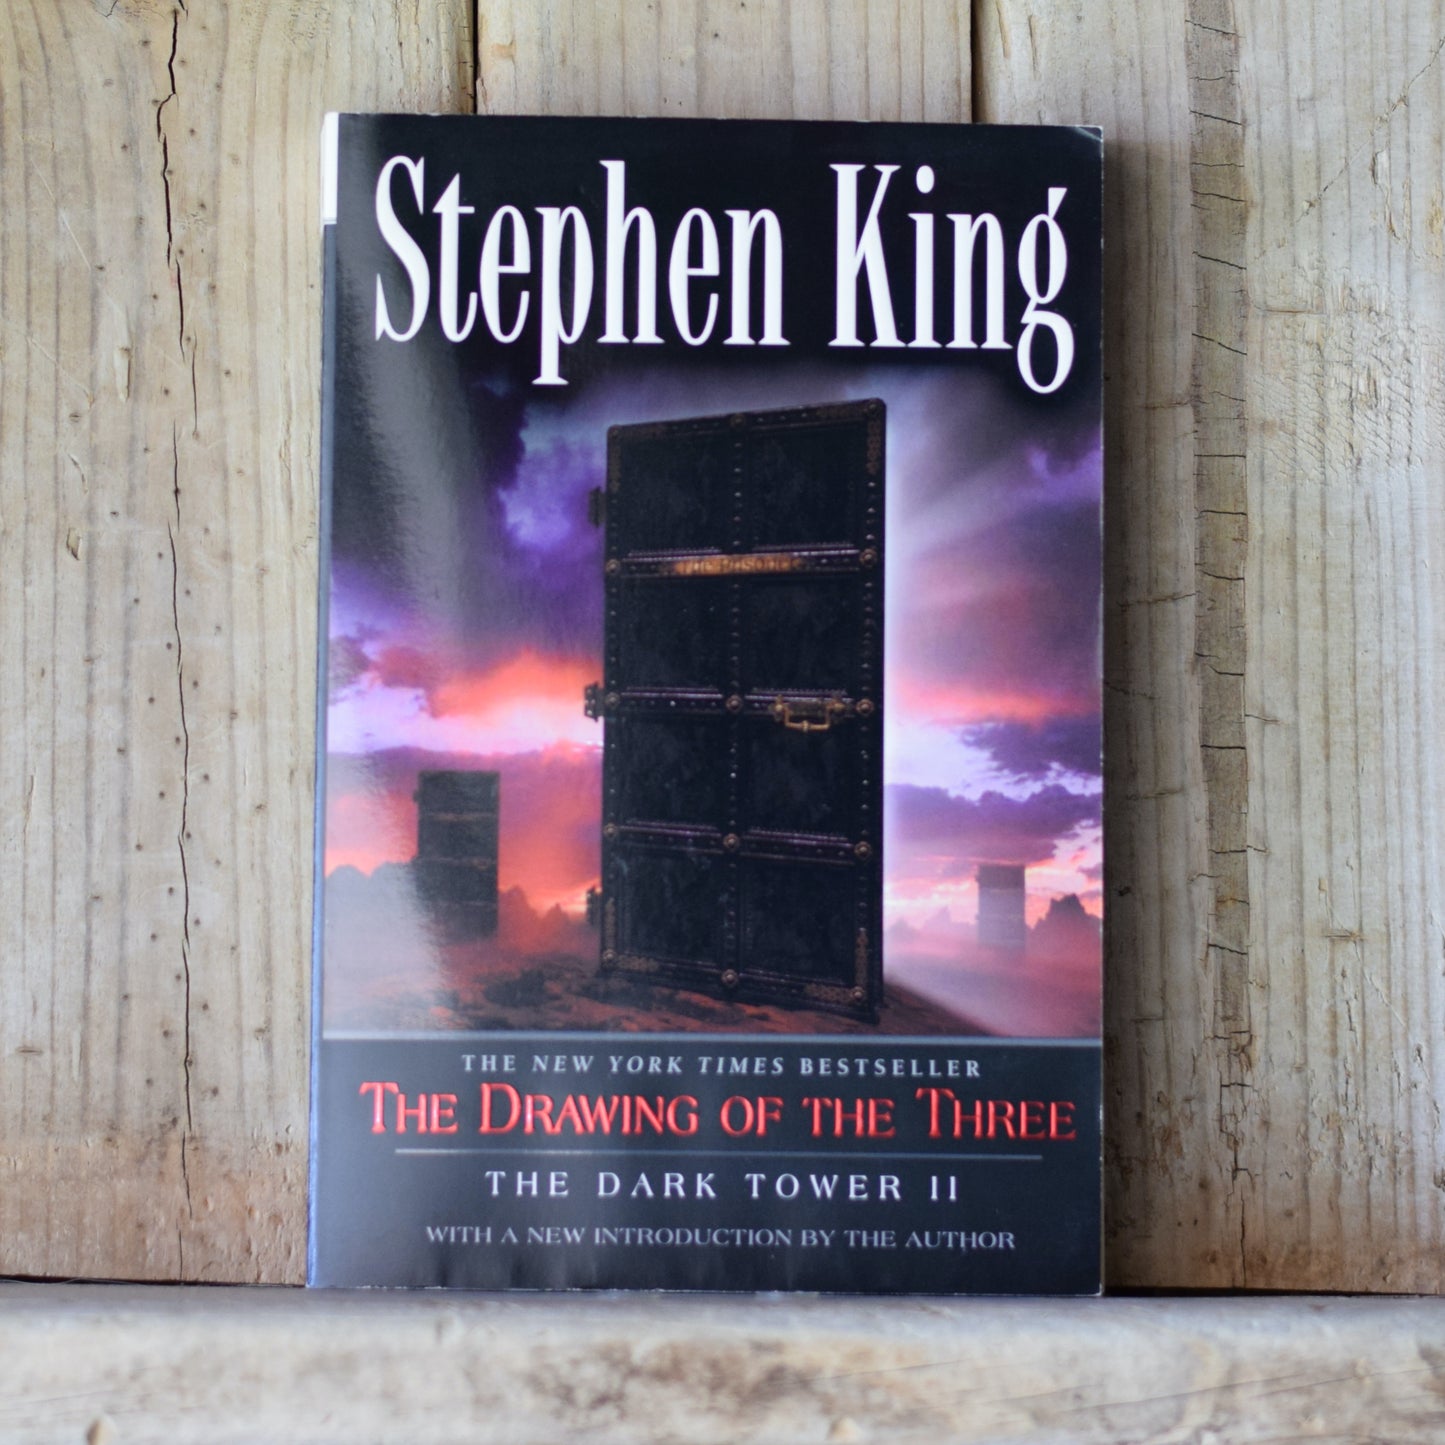 Fantasy Paperback: Stephen King - The Drawing of the Three